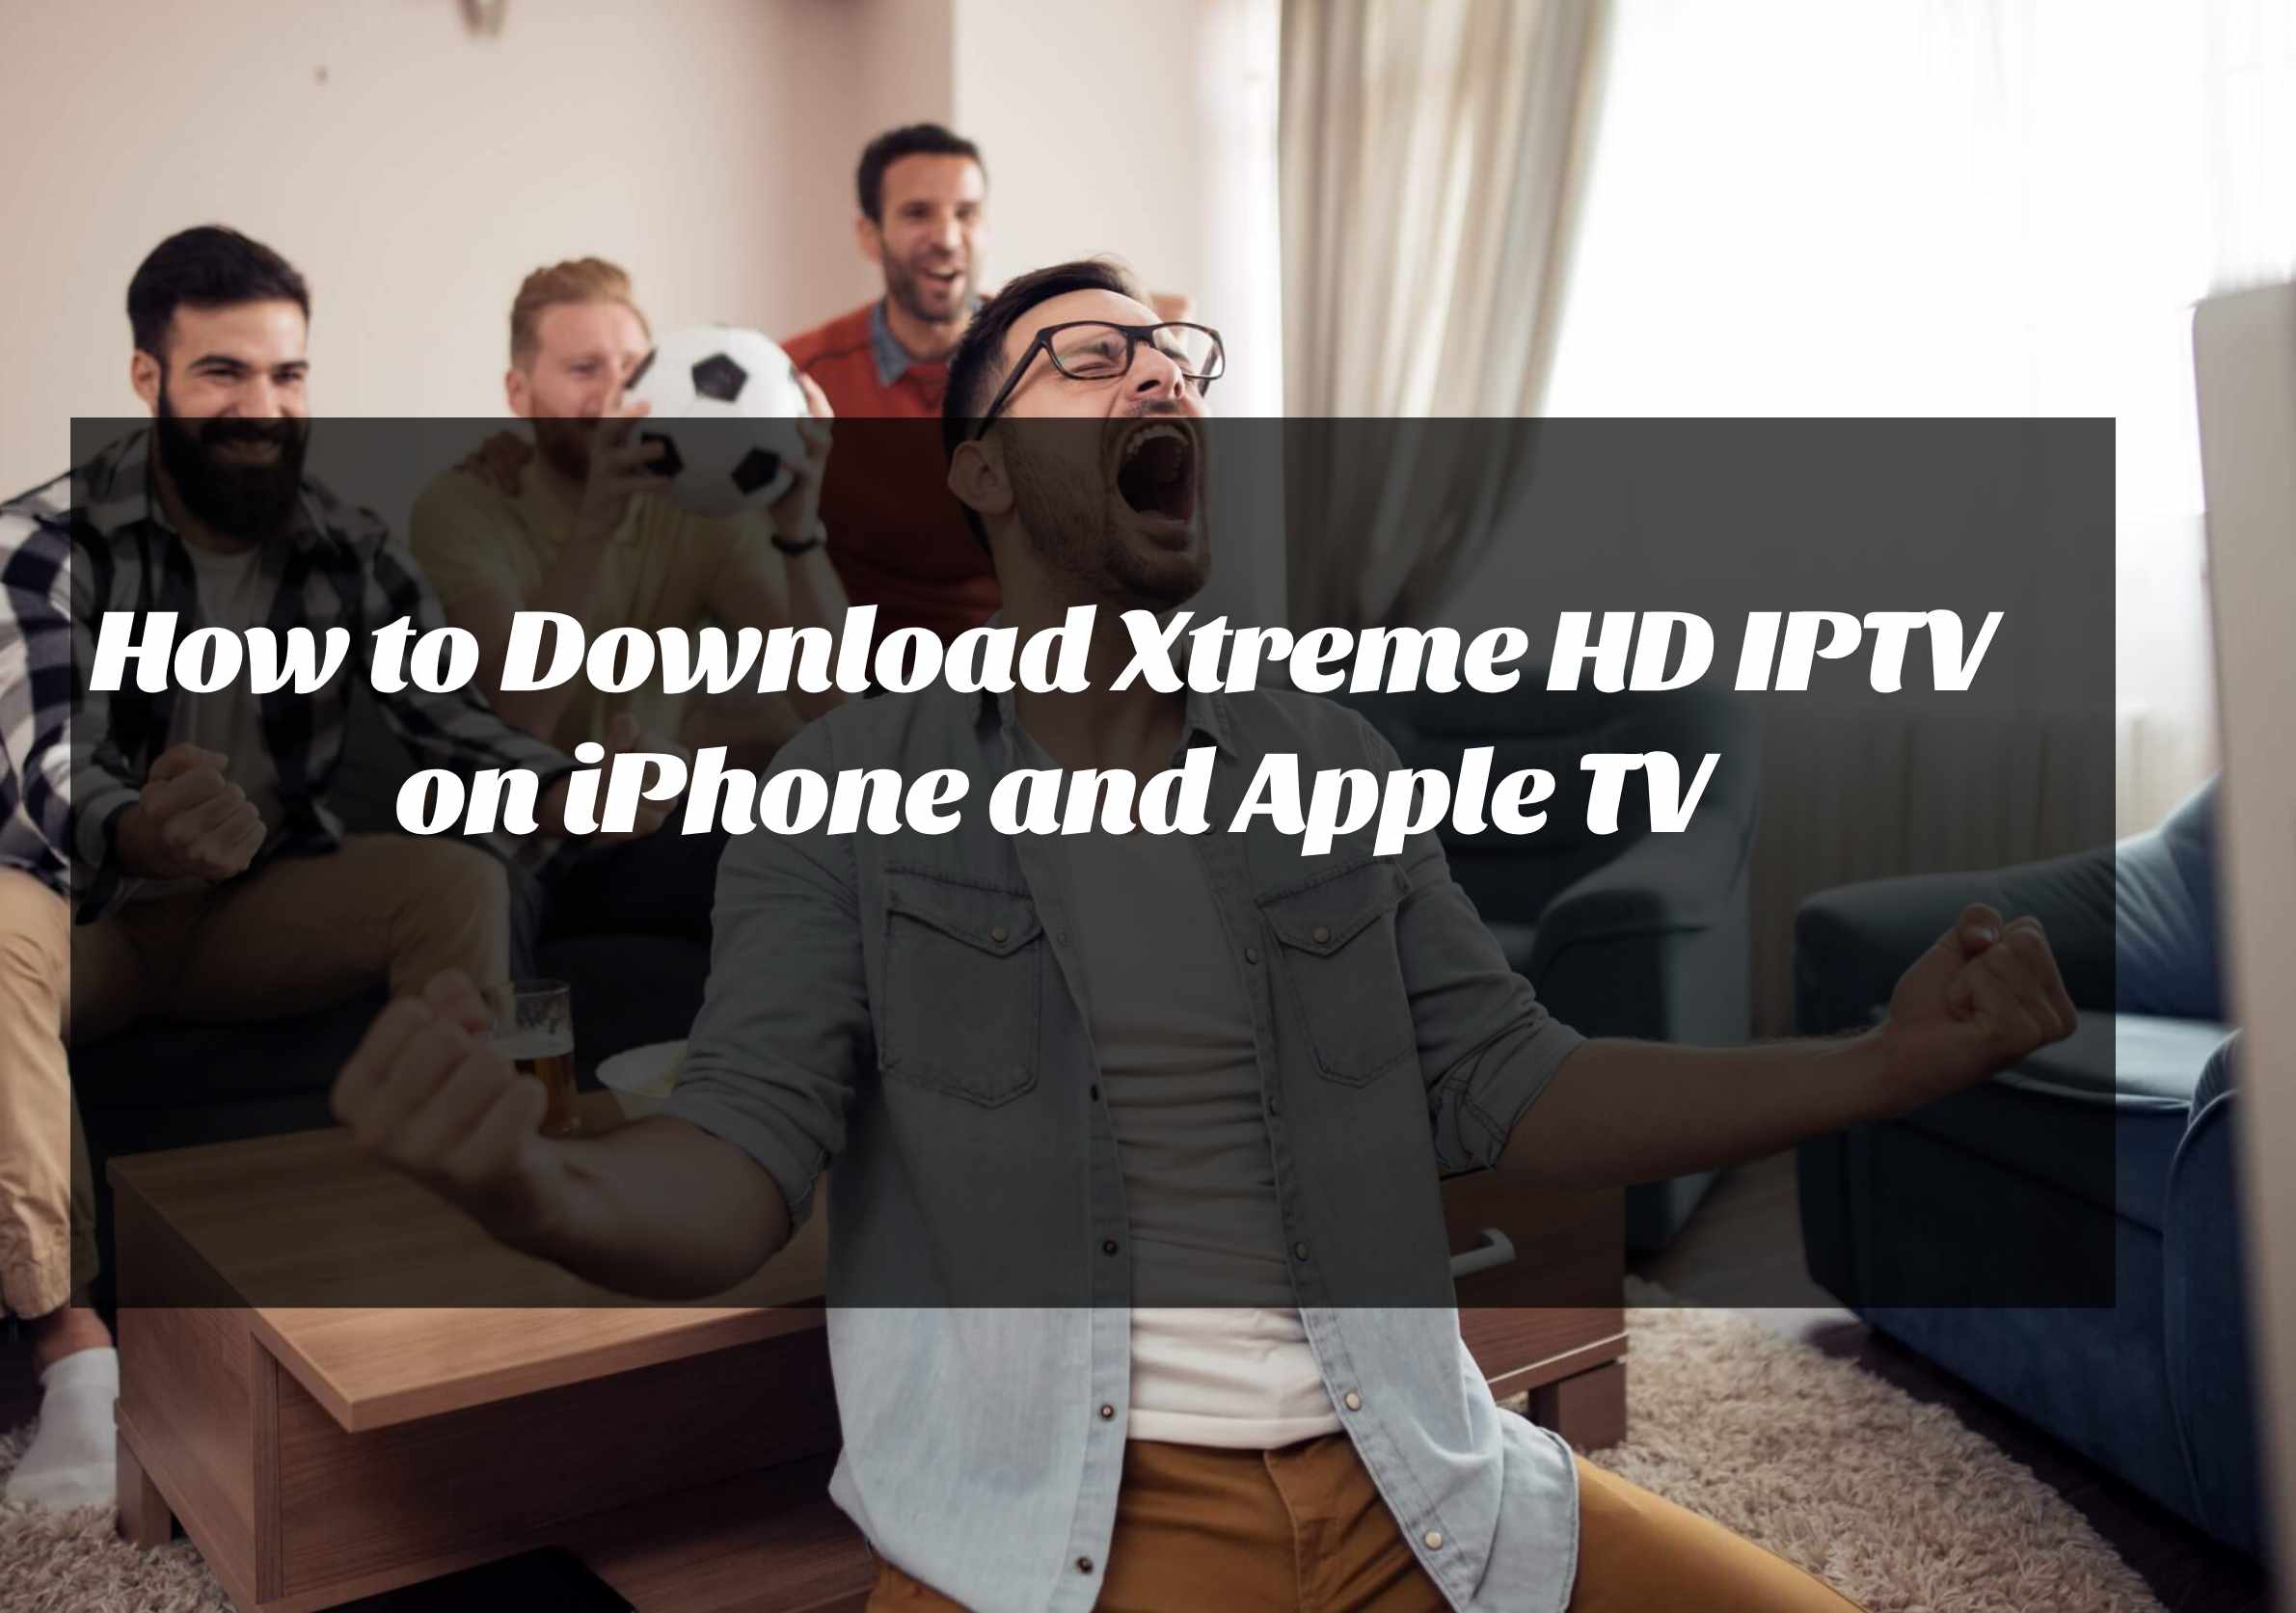 How to Download Xtreme HD IPTV on iPhone and Apple TV